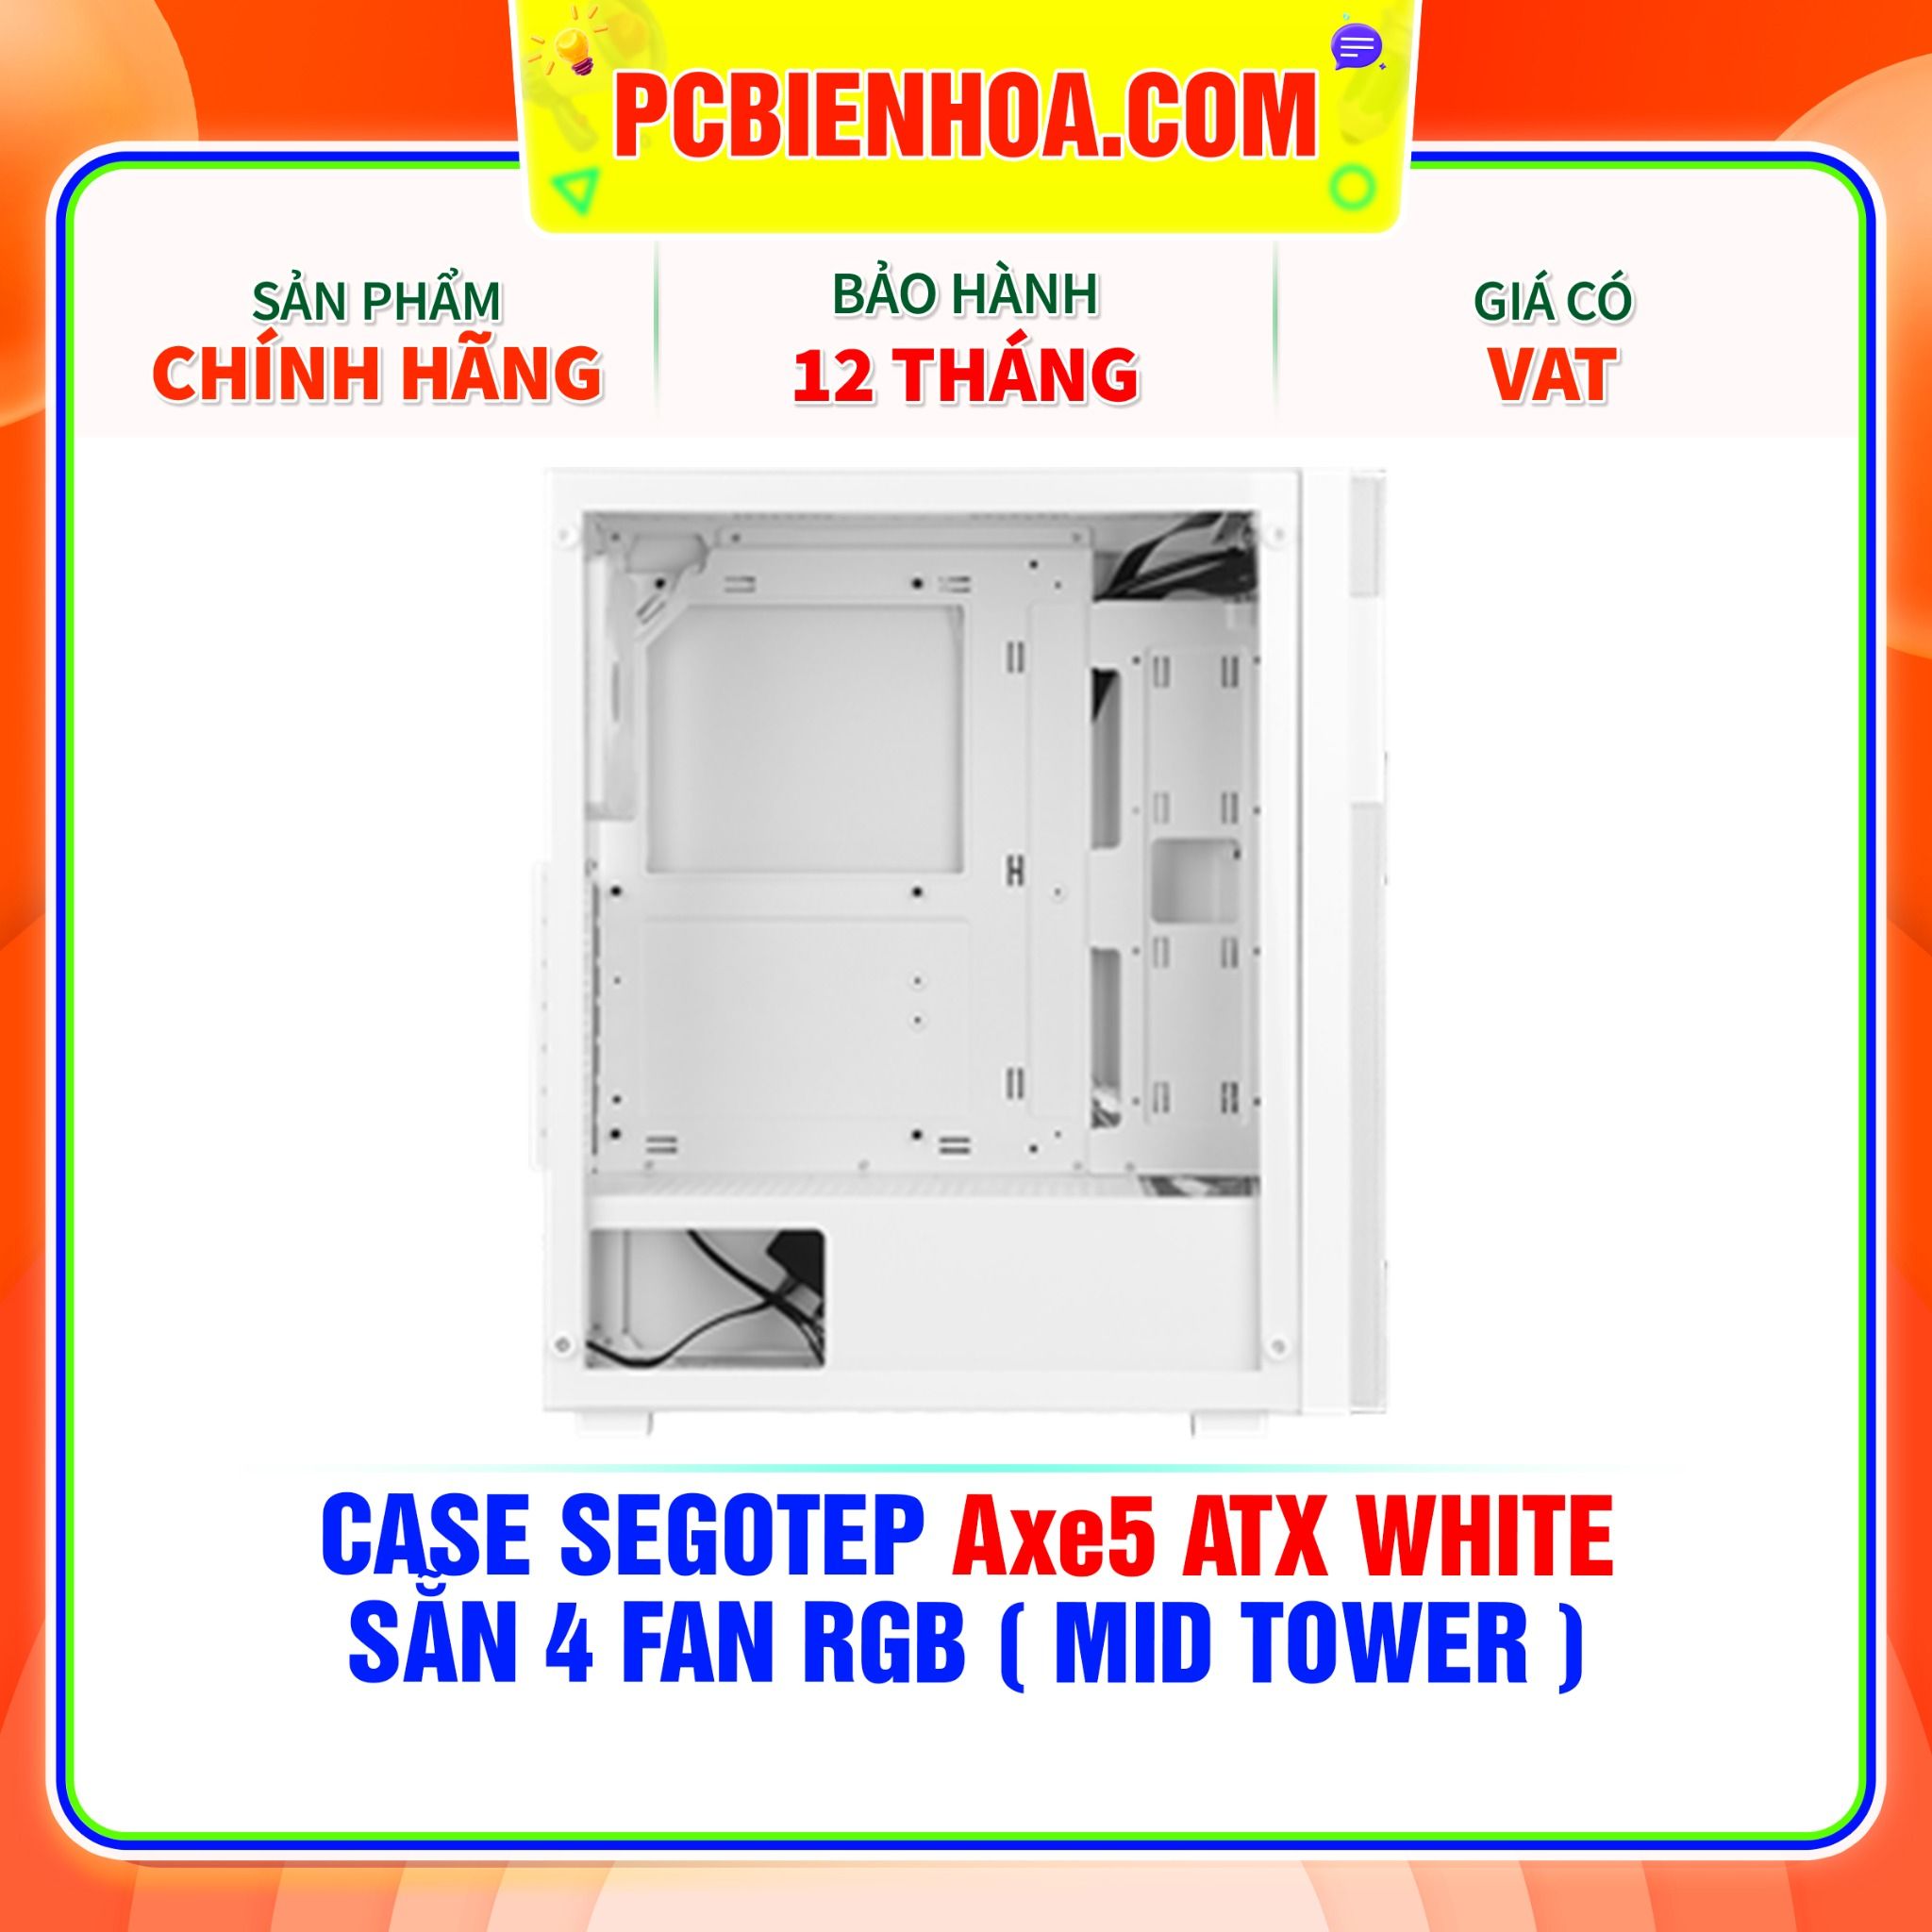  CASE SEGOTEP Axe5 ATX WHITE - SẴN 4 FAN RGB ( MID TOWER ) 